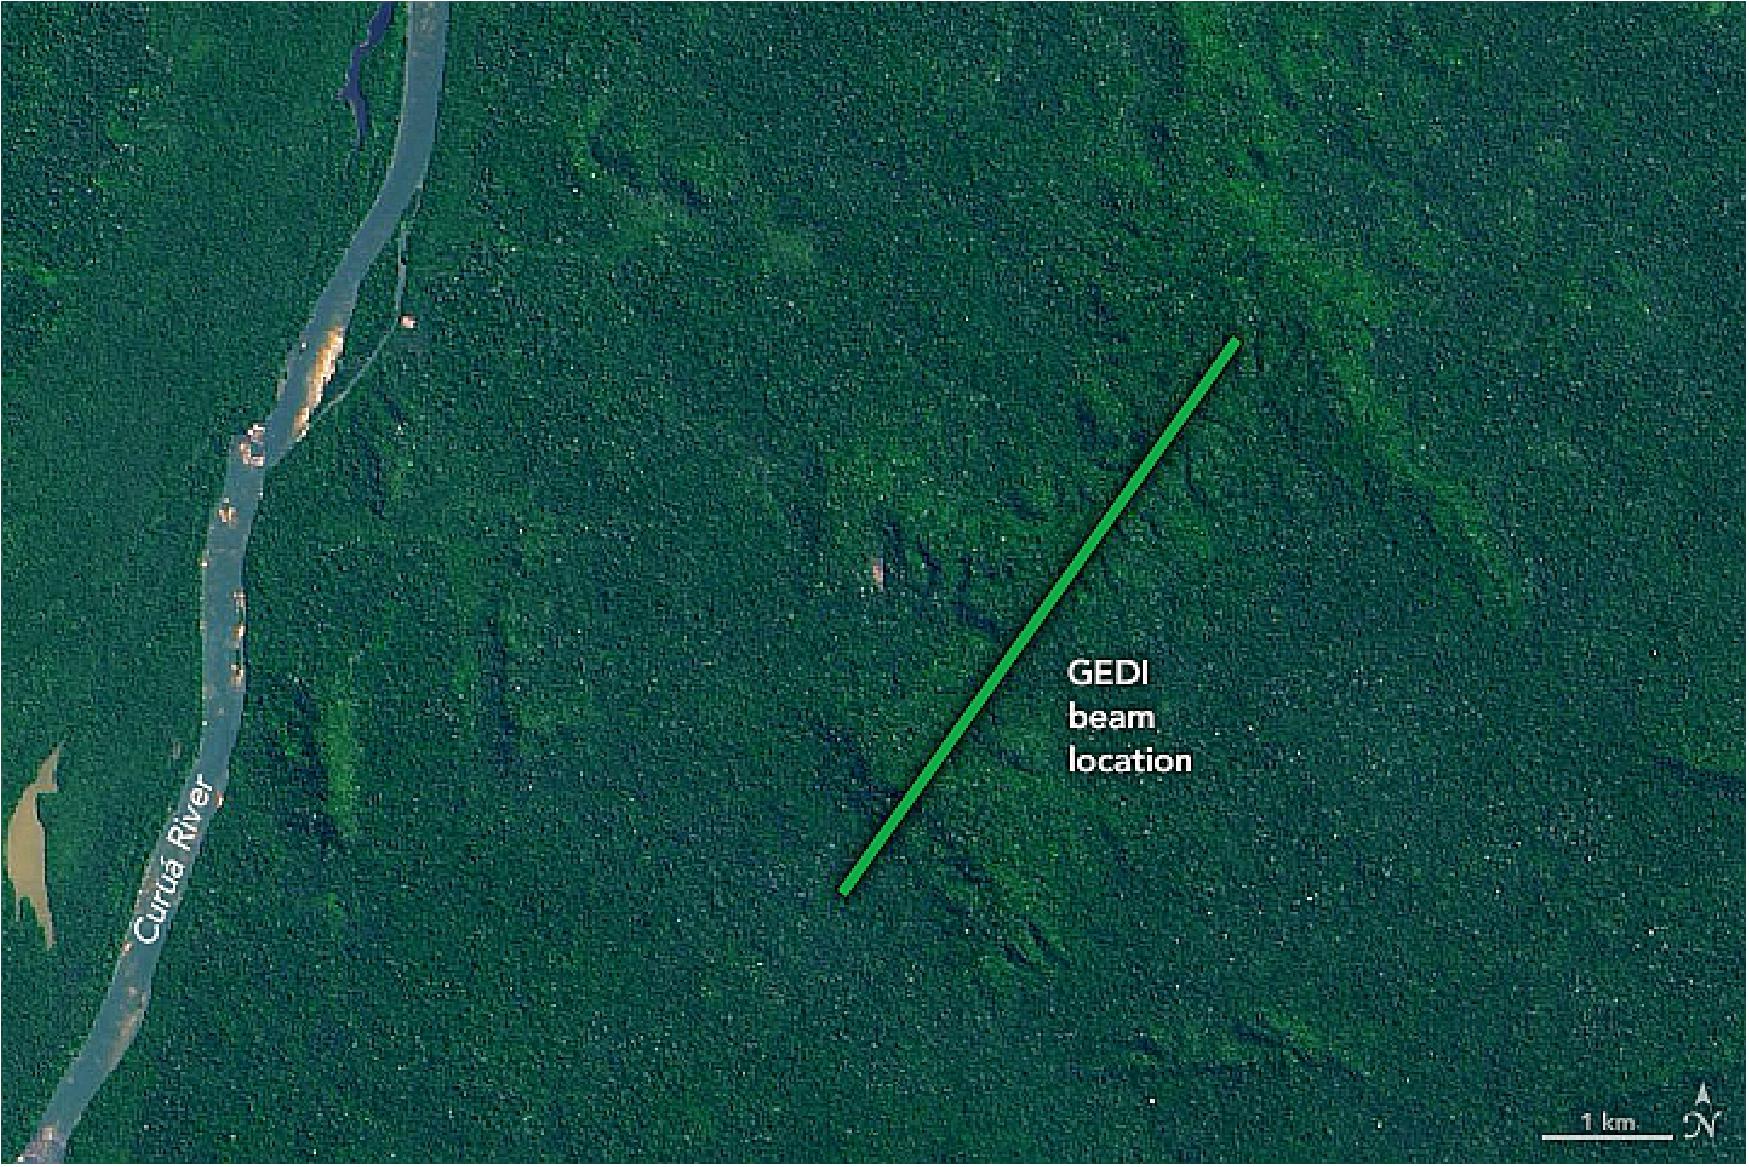 Figure 12: GEDI's three lasers cover a path roughly 4 km wide, capturing canopy height and forest structure across the swath. This track shows where the Amazon forest swath (above) was measured (image credit: NASA Earth Observatory / Lauren Dauphin)